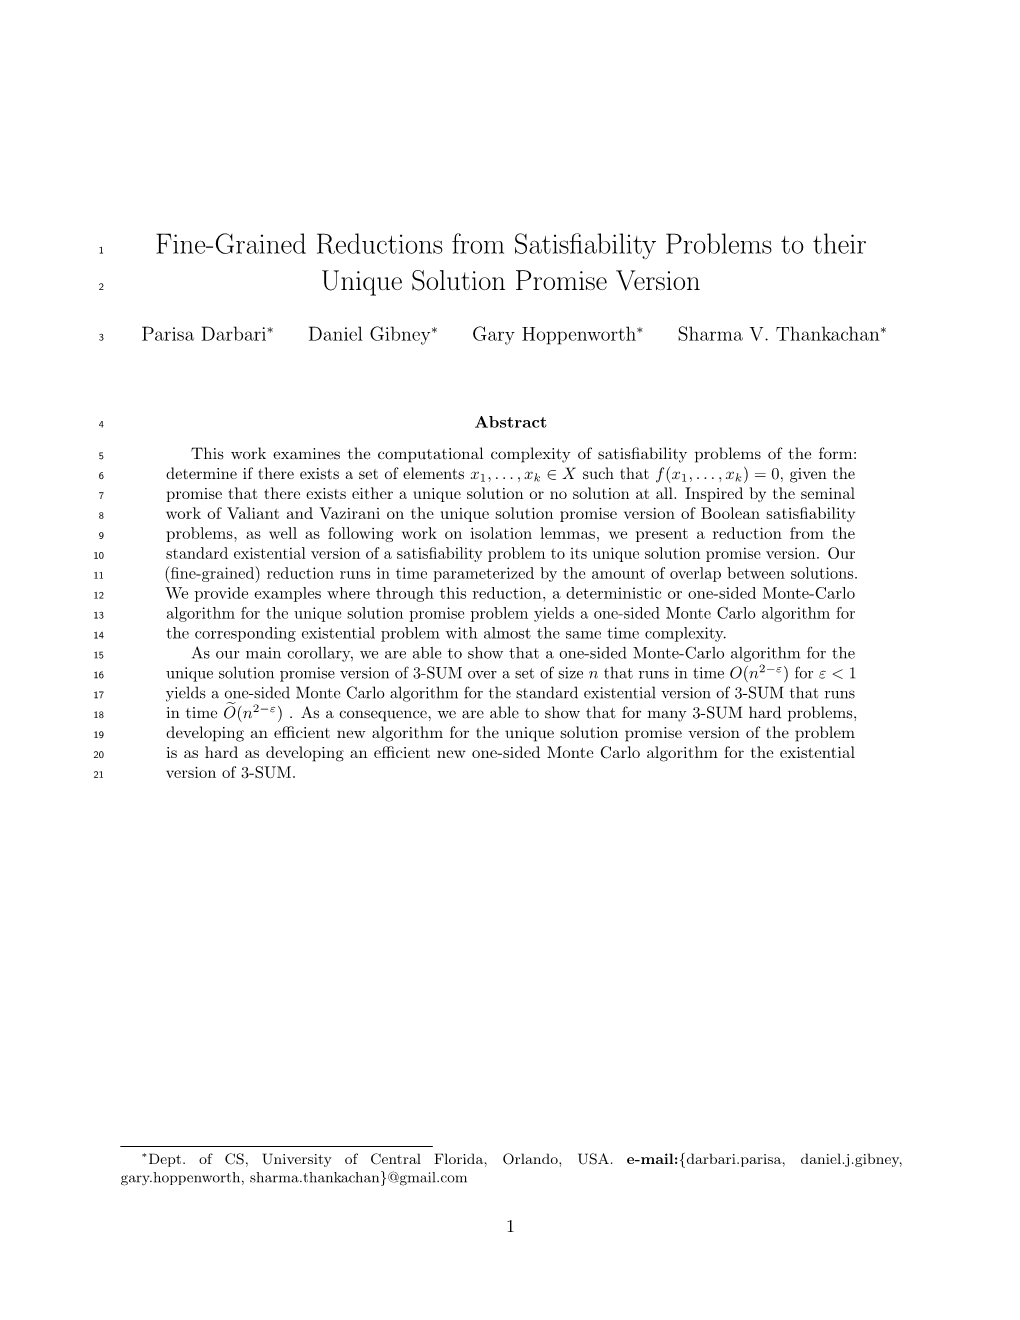 Fine-Grained Reductions from Satisfiability Problems to Their